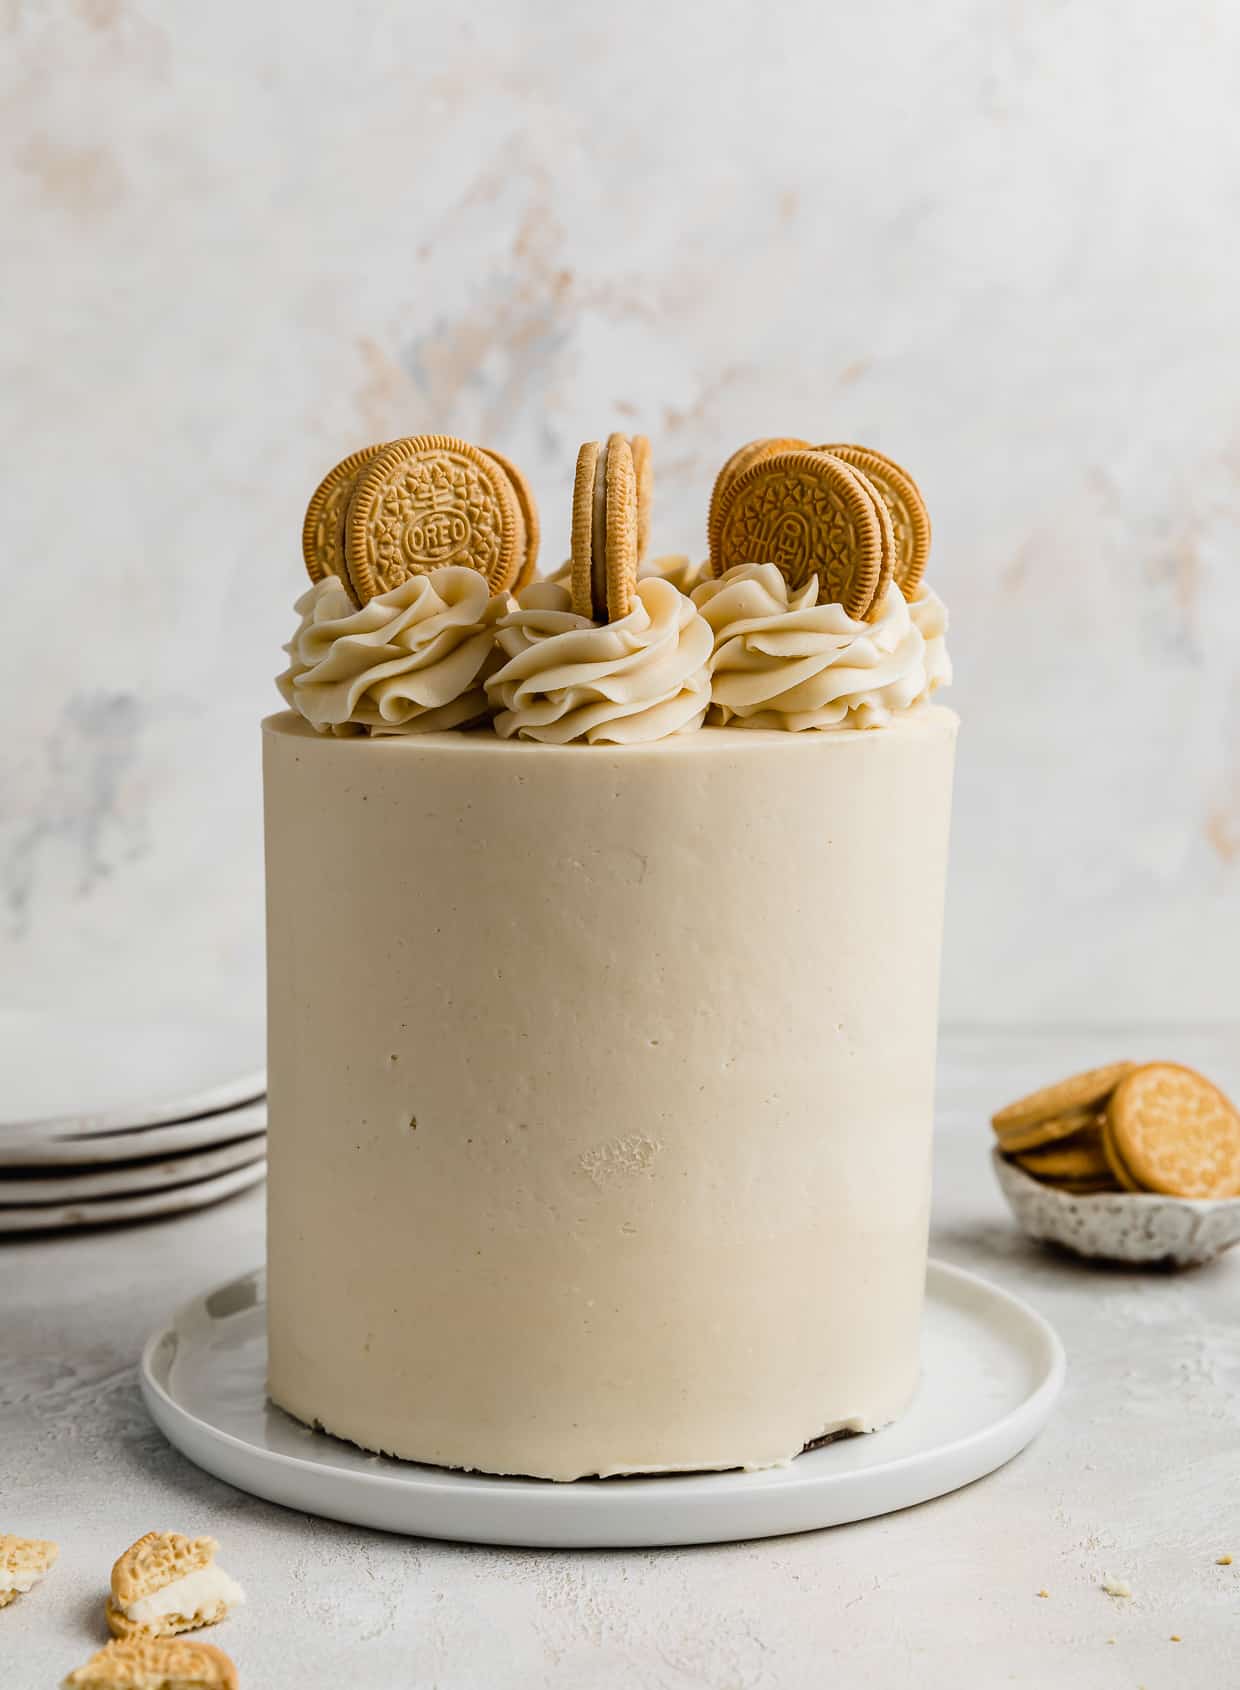 A Golden Oreo Cake topped with frosting swirls and Golden Oreos.